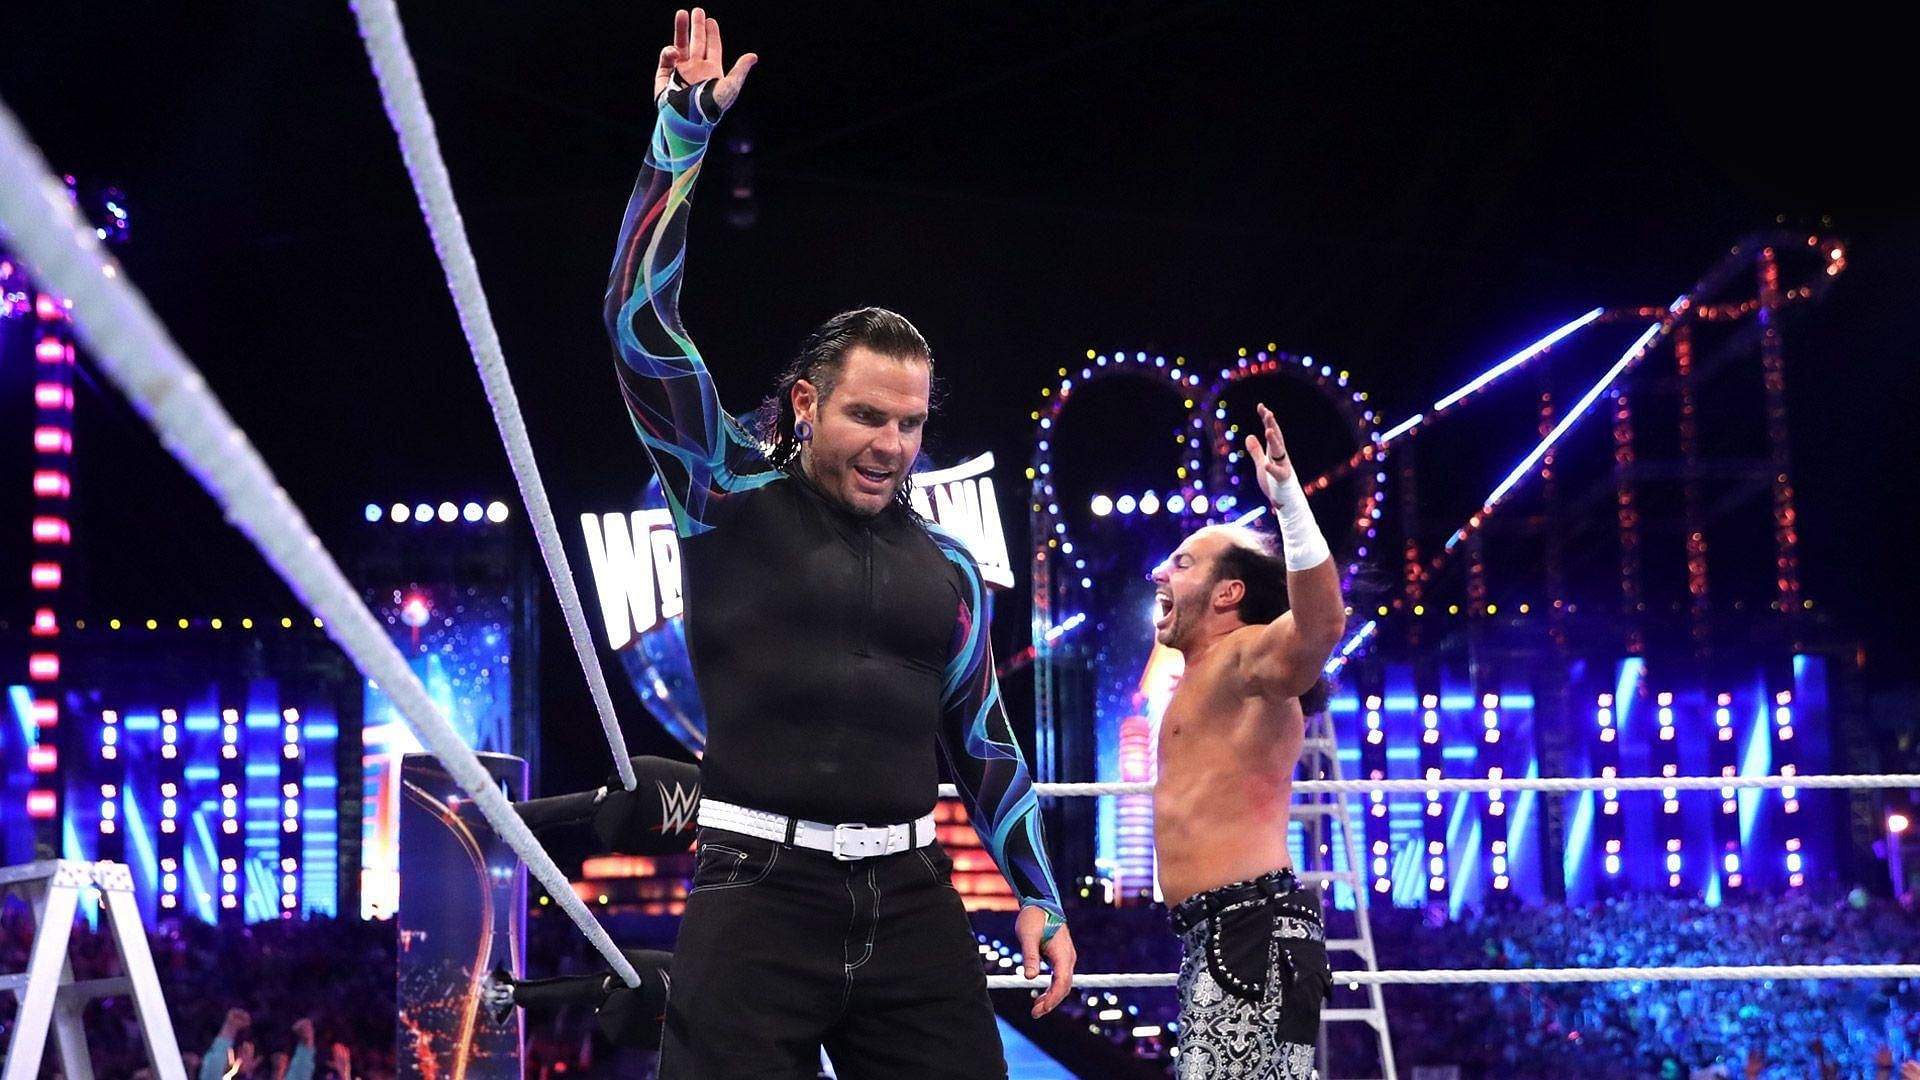 Jeff Hardy returned with his brother at WrestleMania 33